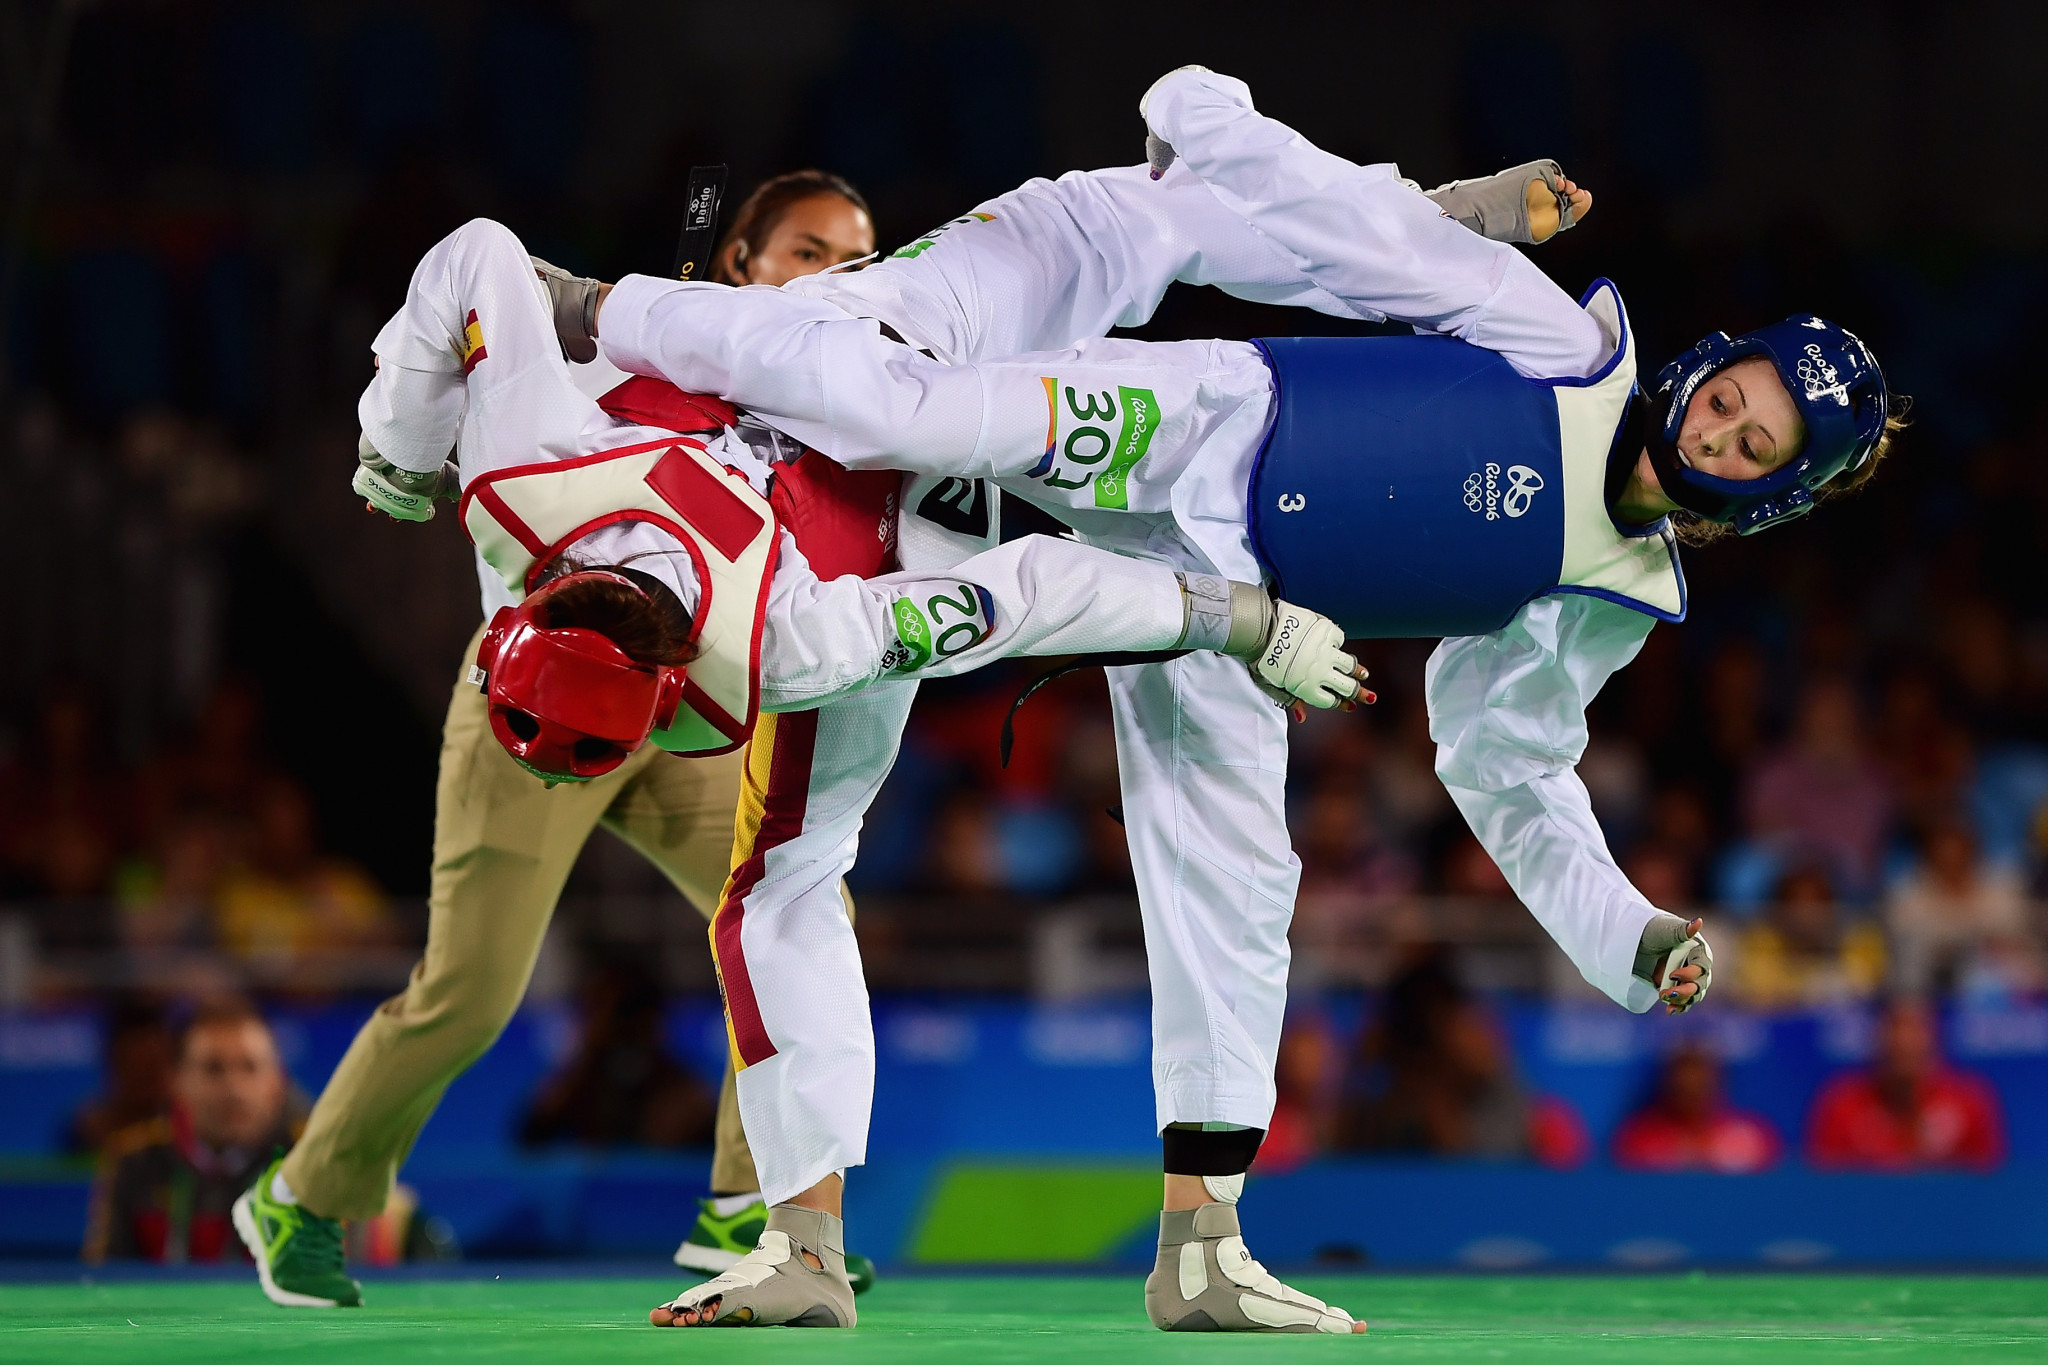 Taekwondo's chances of being included on Birmingham 2022 programme